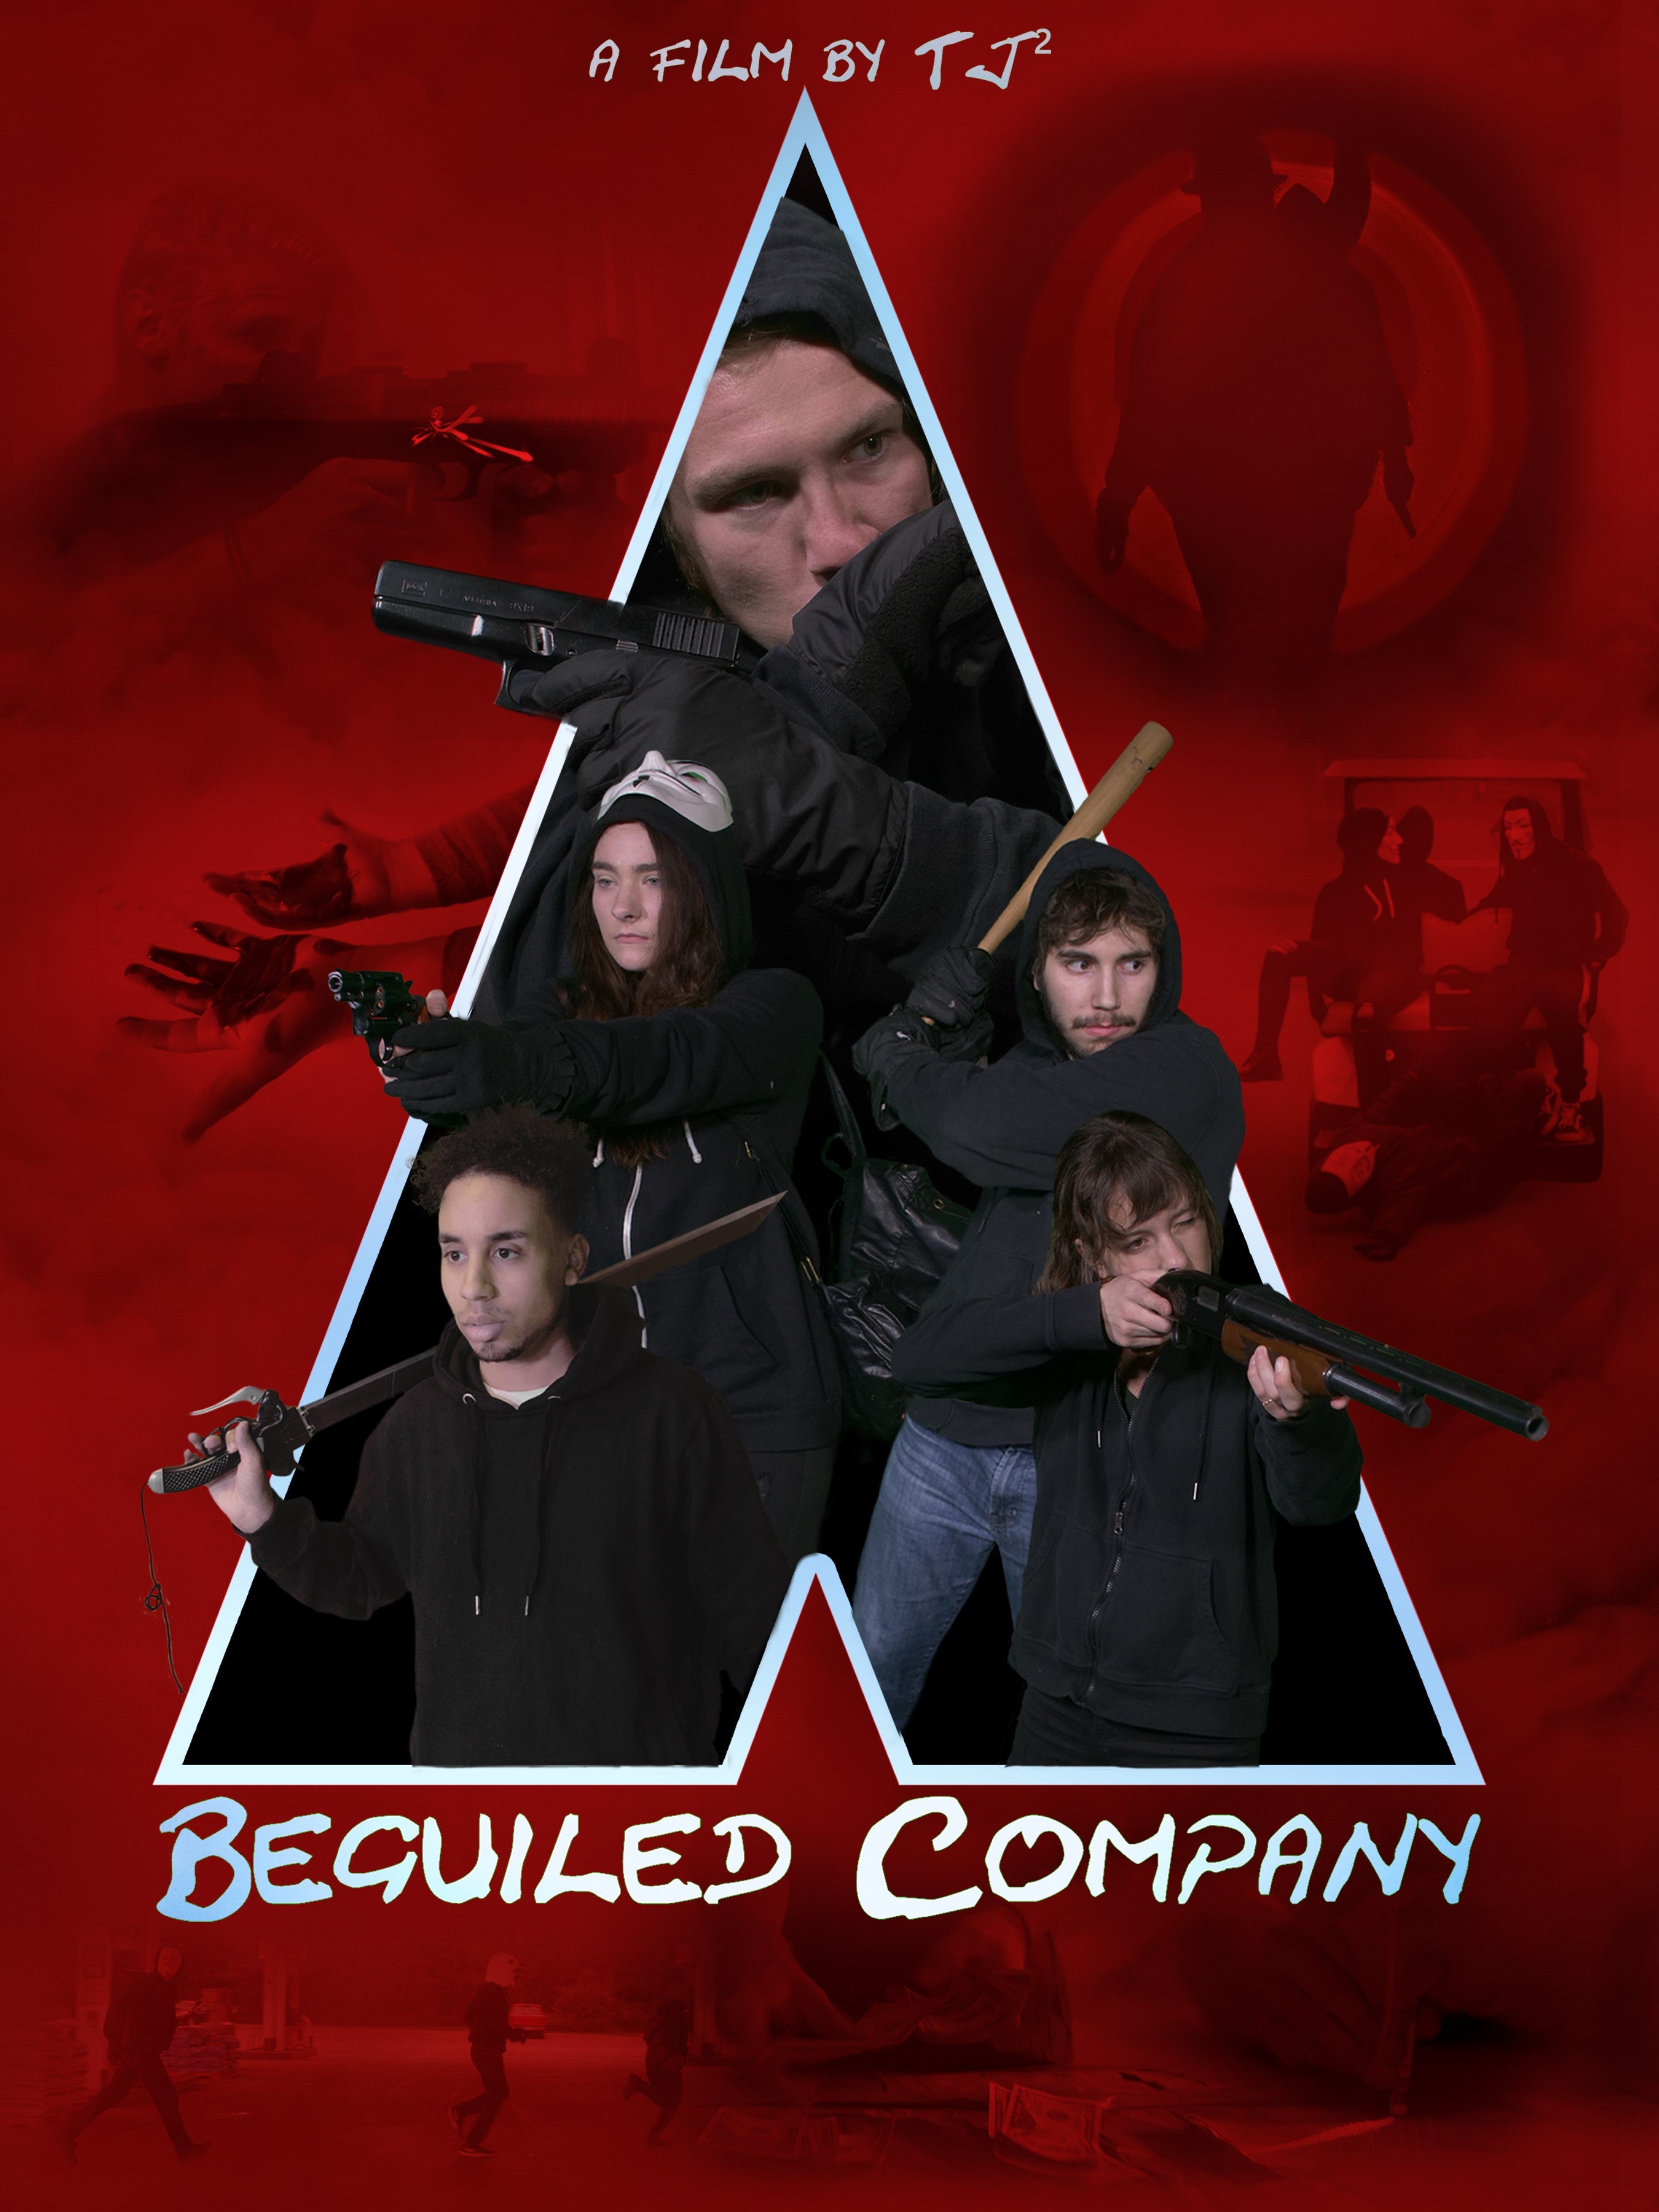 BEGUILED COMPANY DVD